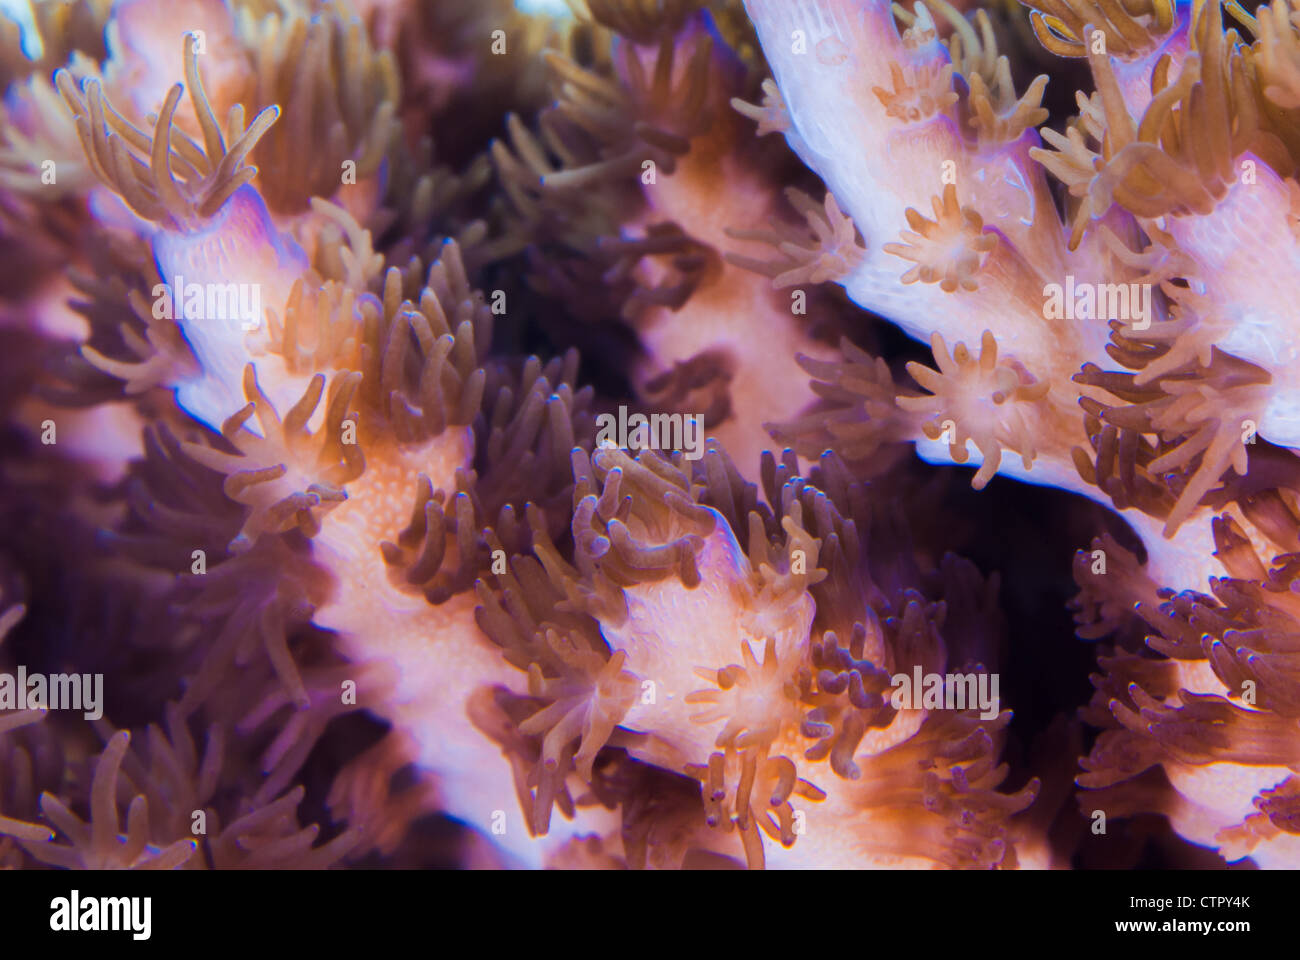 https://c8.alamy.com/comp/CTPY4K/close-up-of-acropora-coral-polyps-open-showing-connecting-channels-CTPY4K.jpg